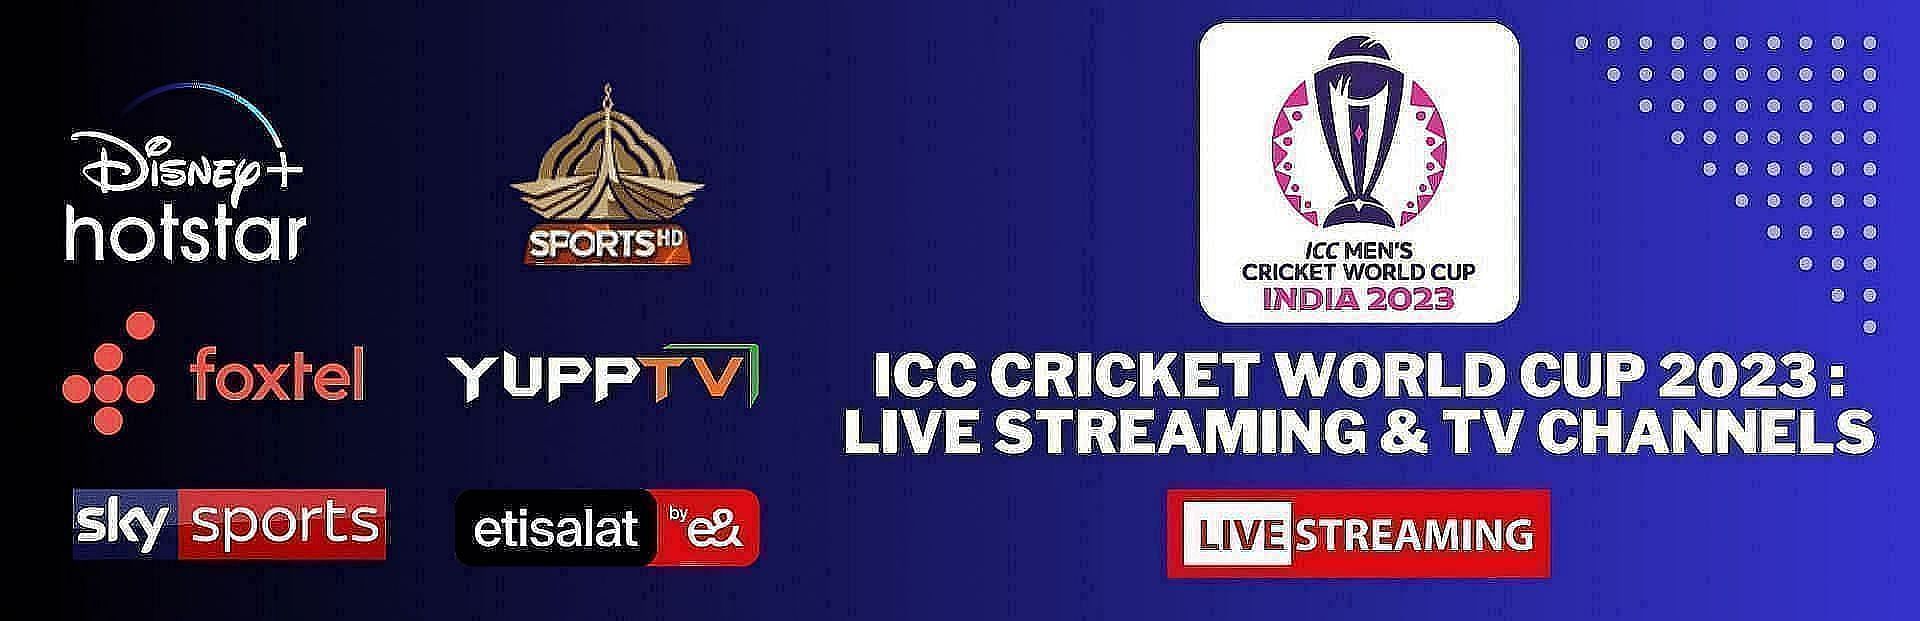 ICC Cricket World Cup 2023 Broadcast Channel List and Channel Number